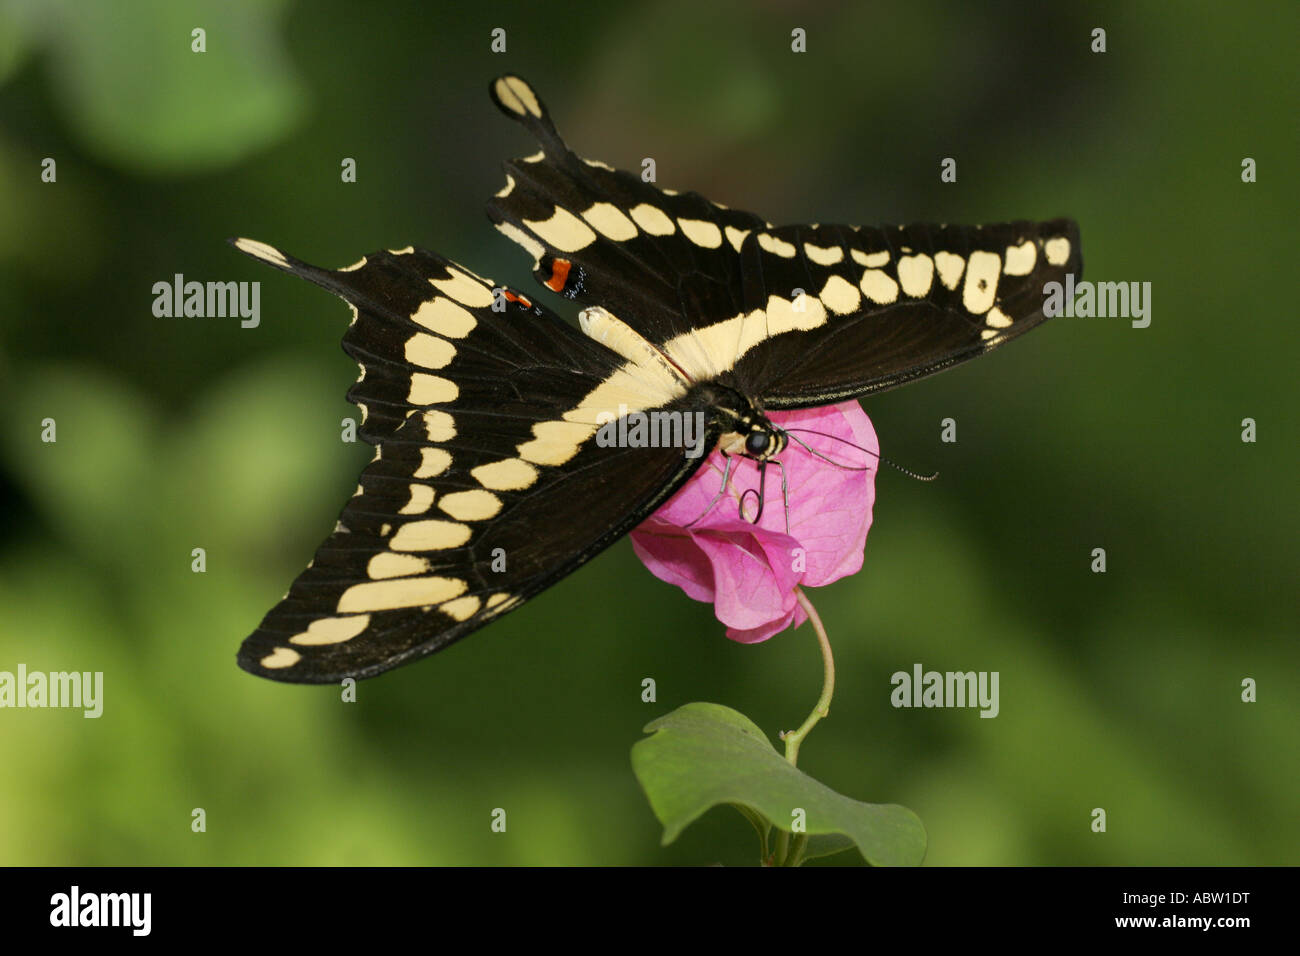 Giant Swallowtail butterfly topside view Stock Photo